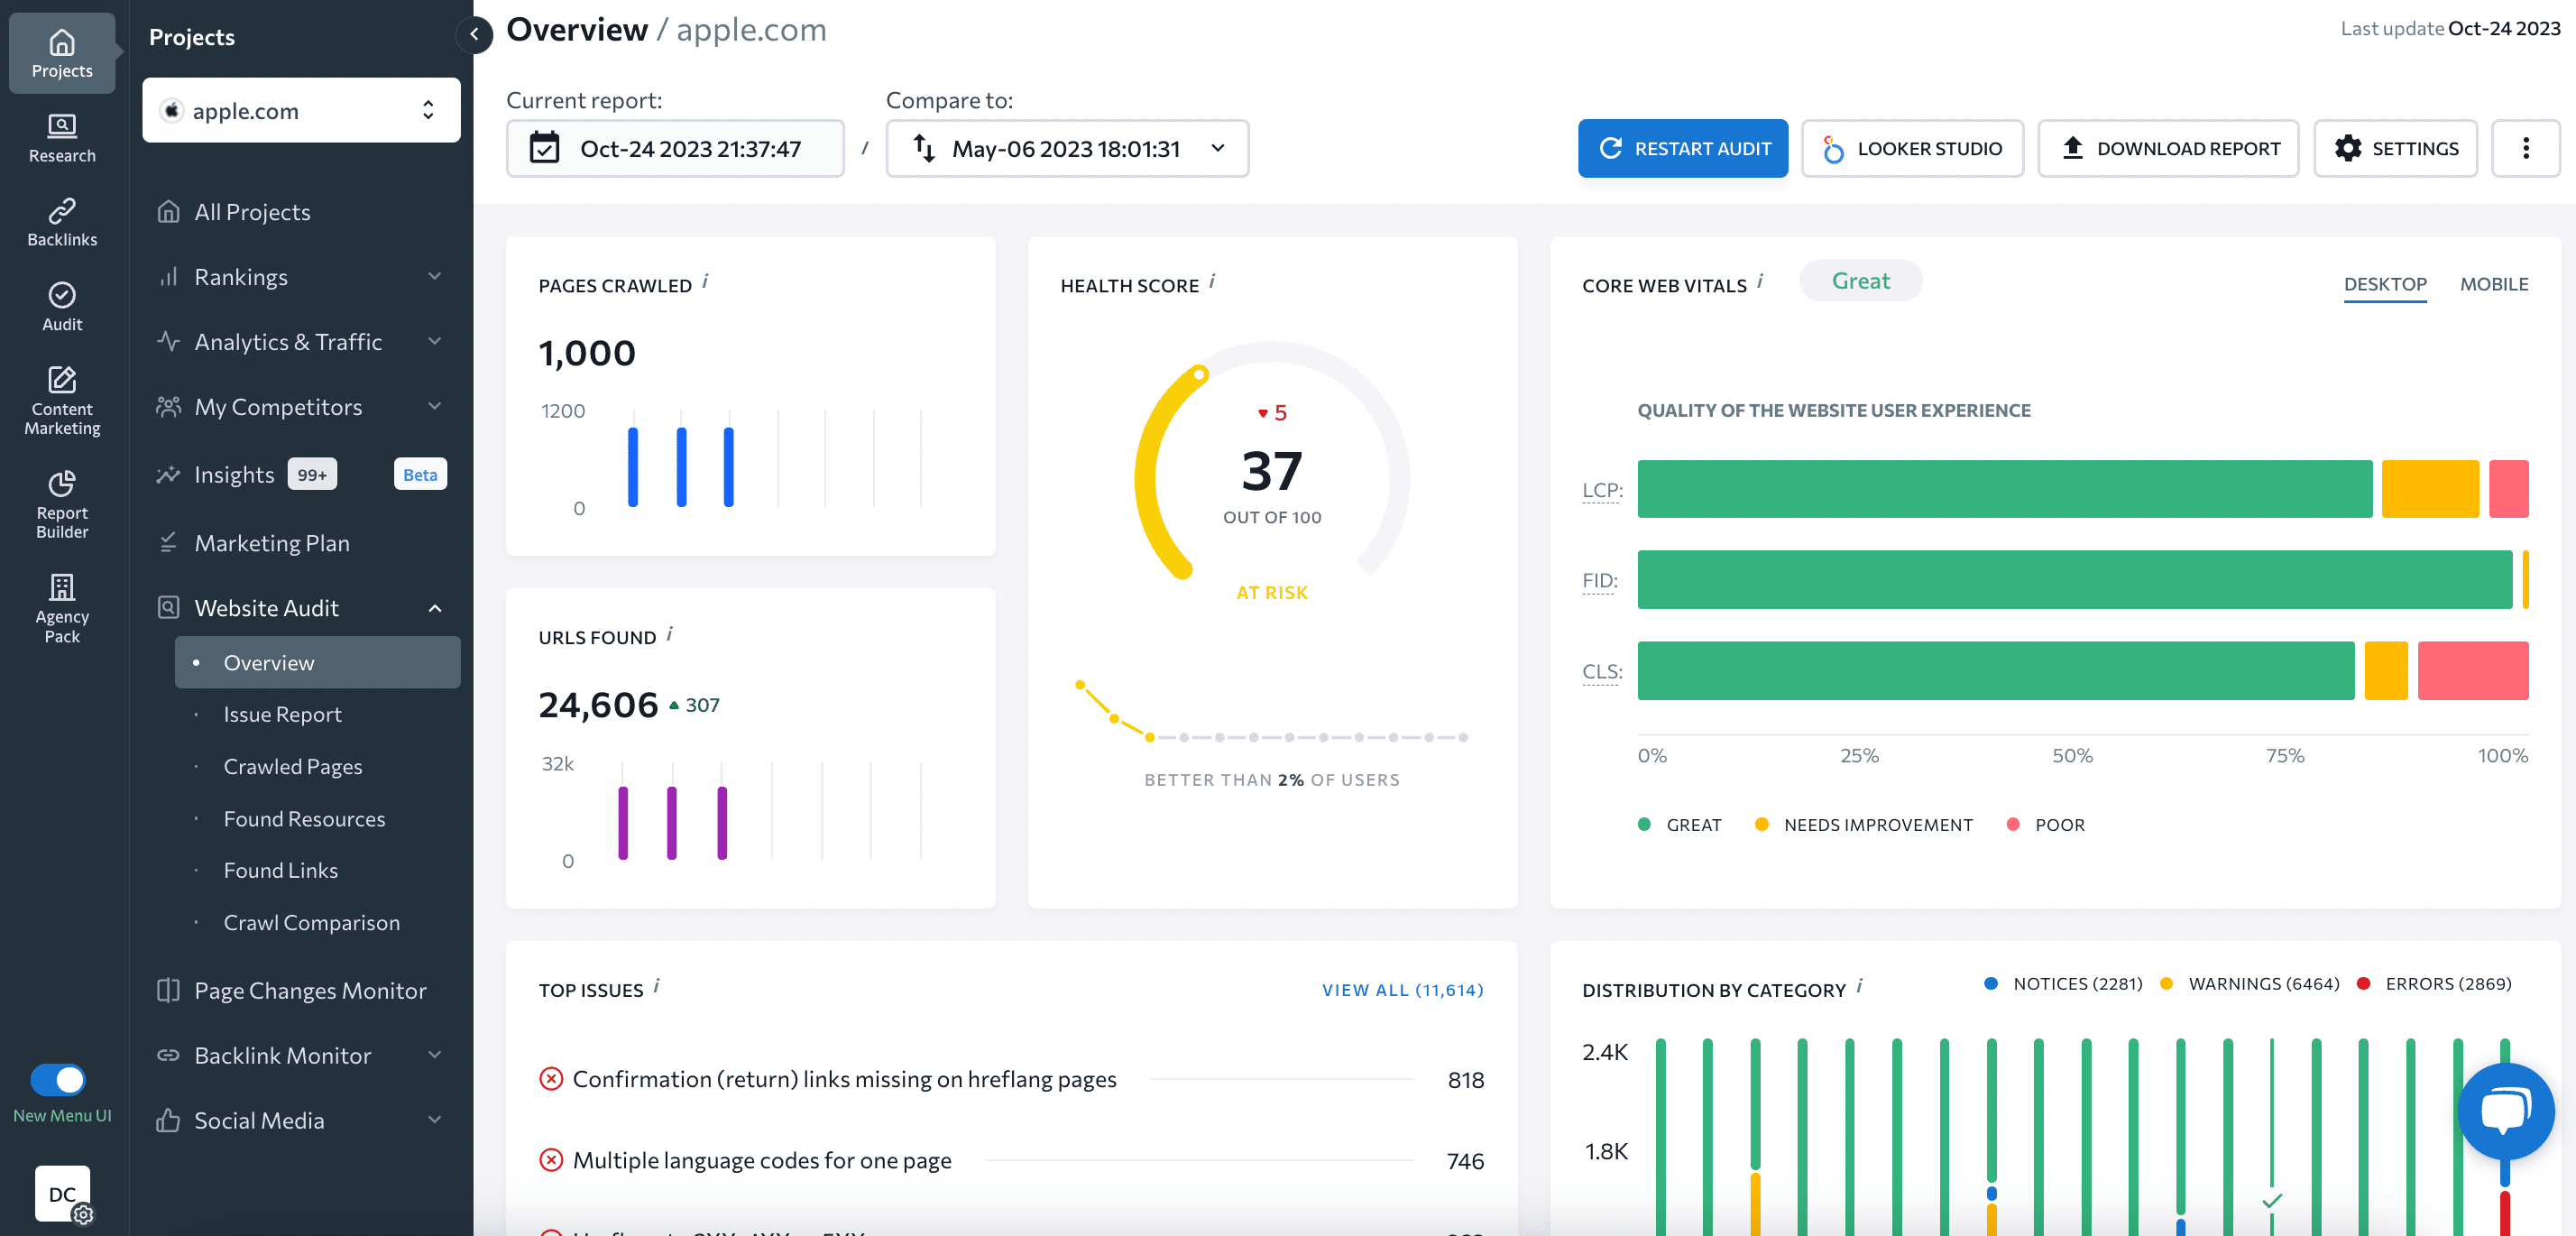 Overview of the Website Audit report